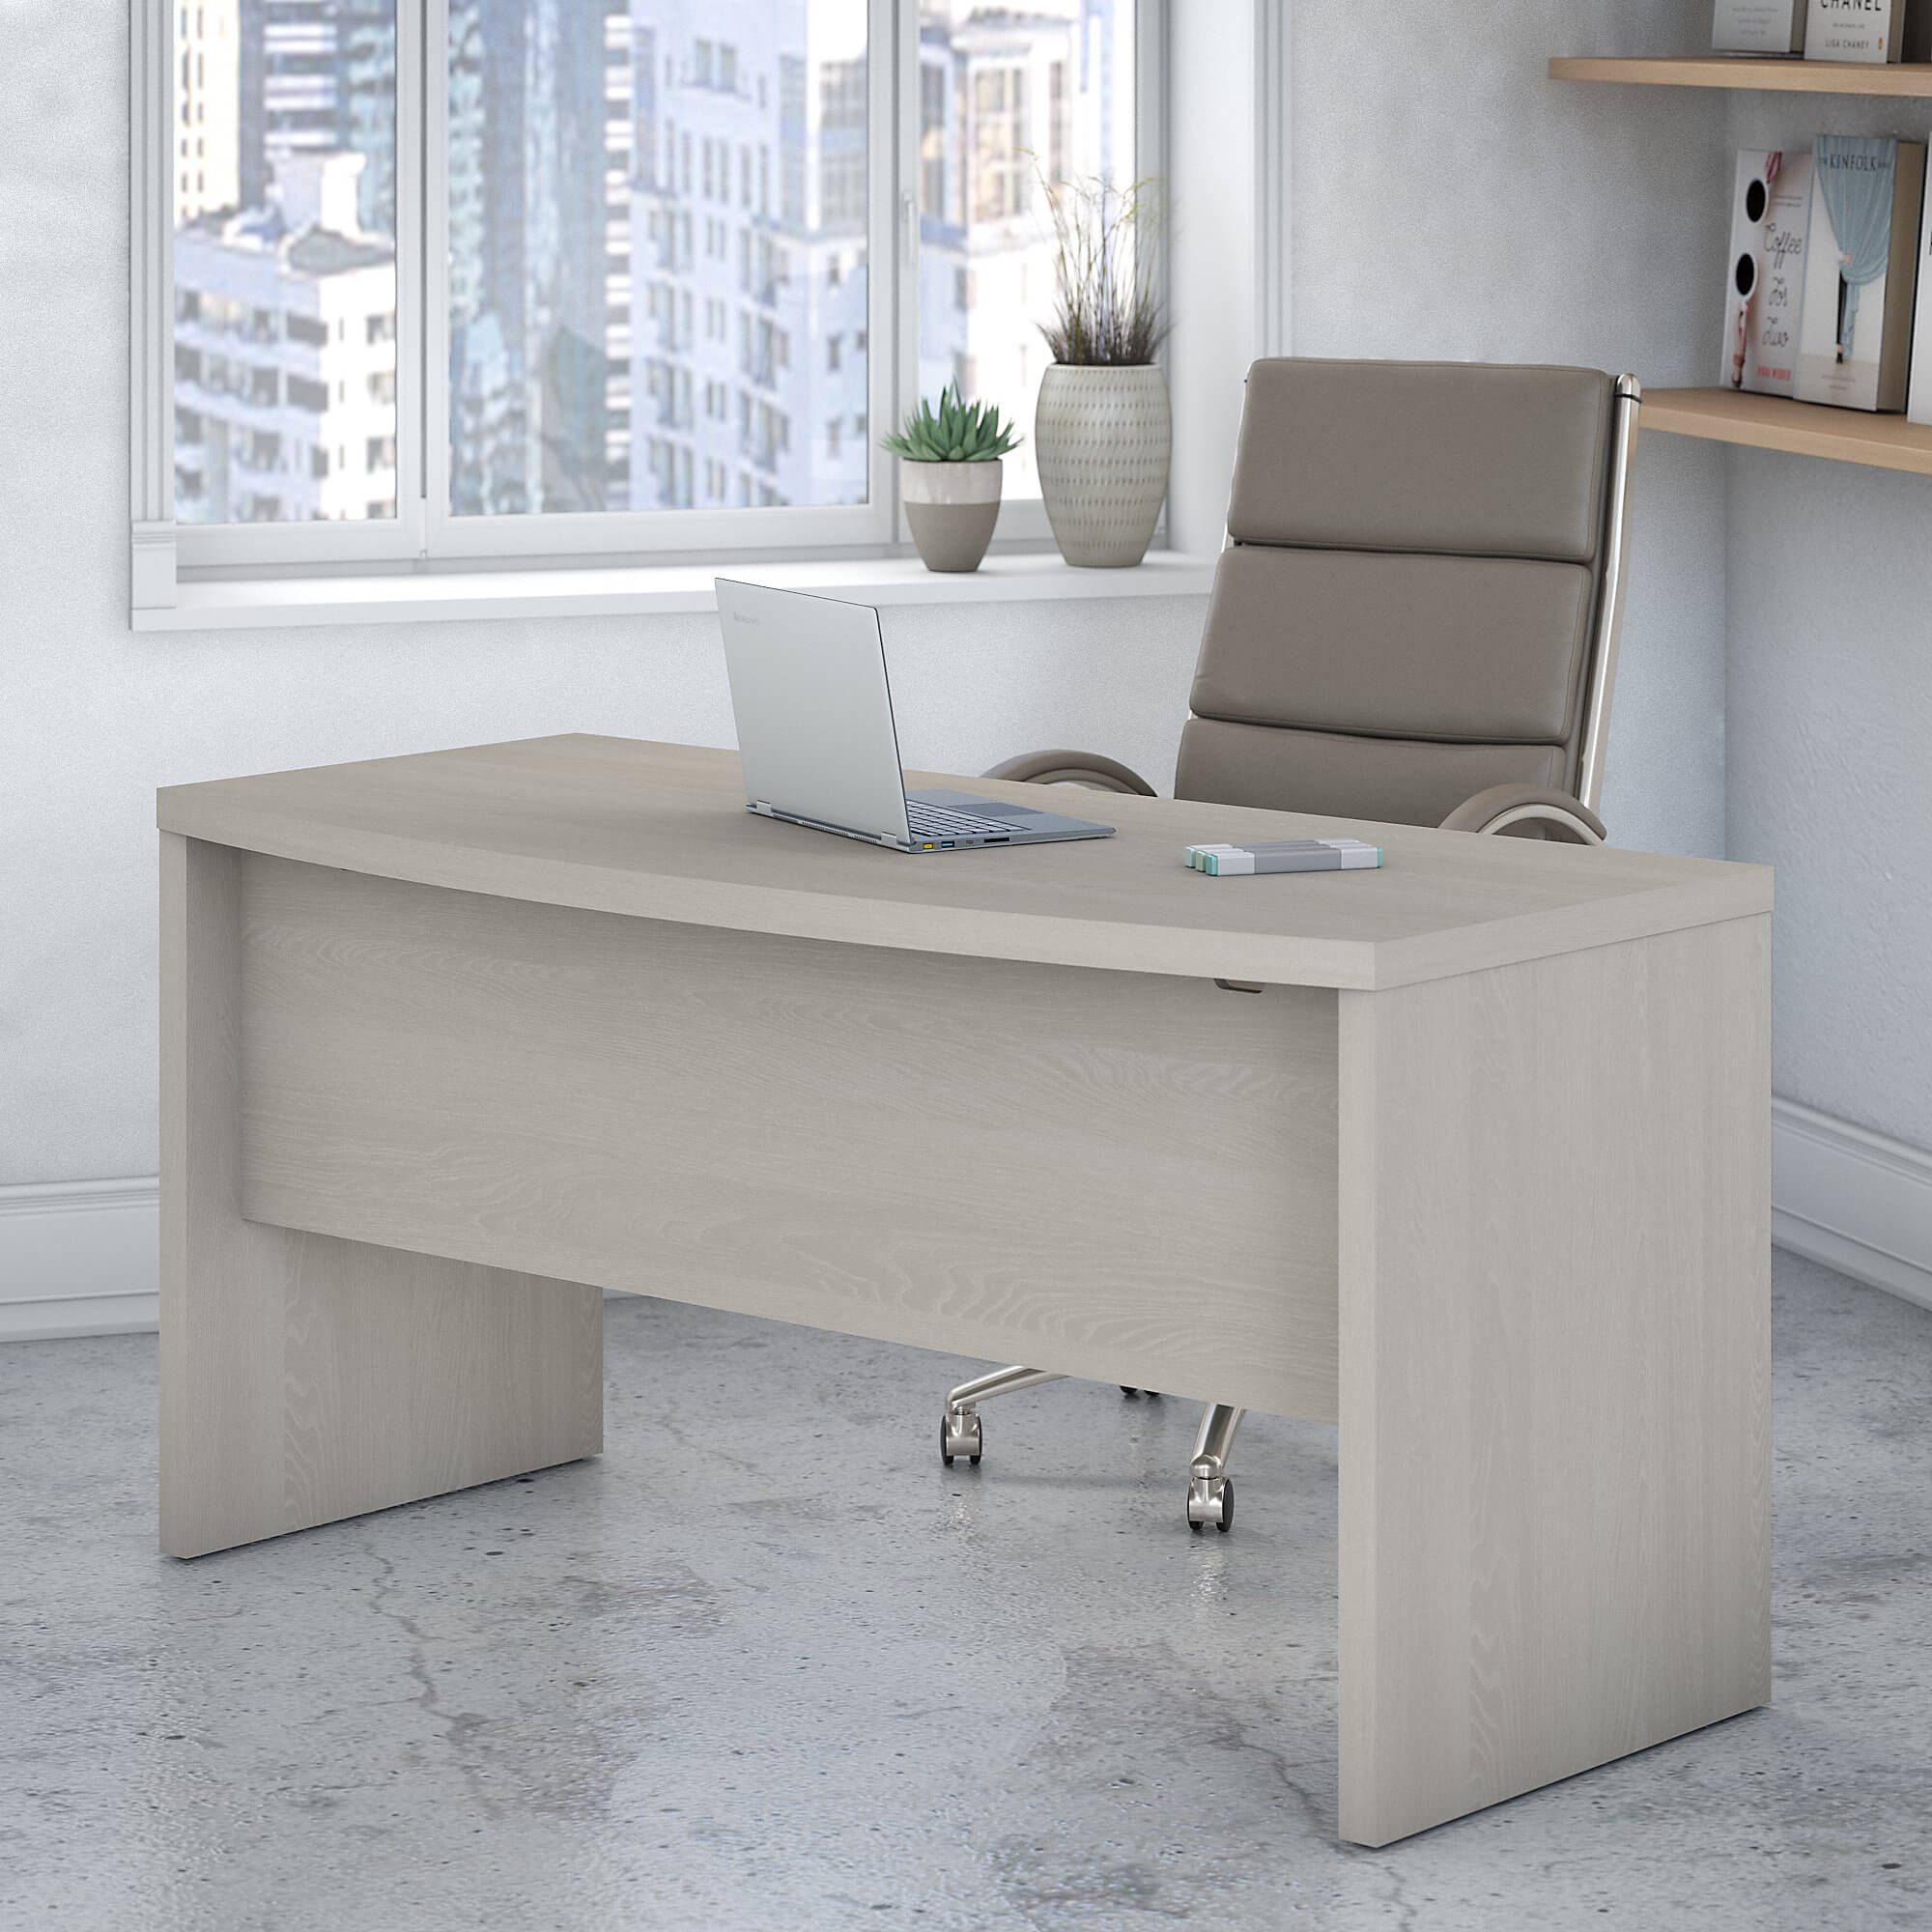 Grey wood office desk overview